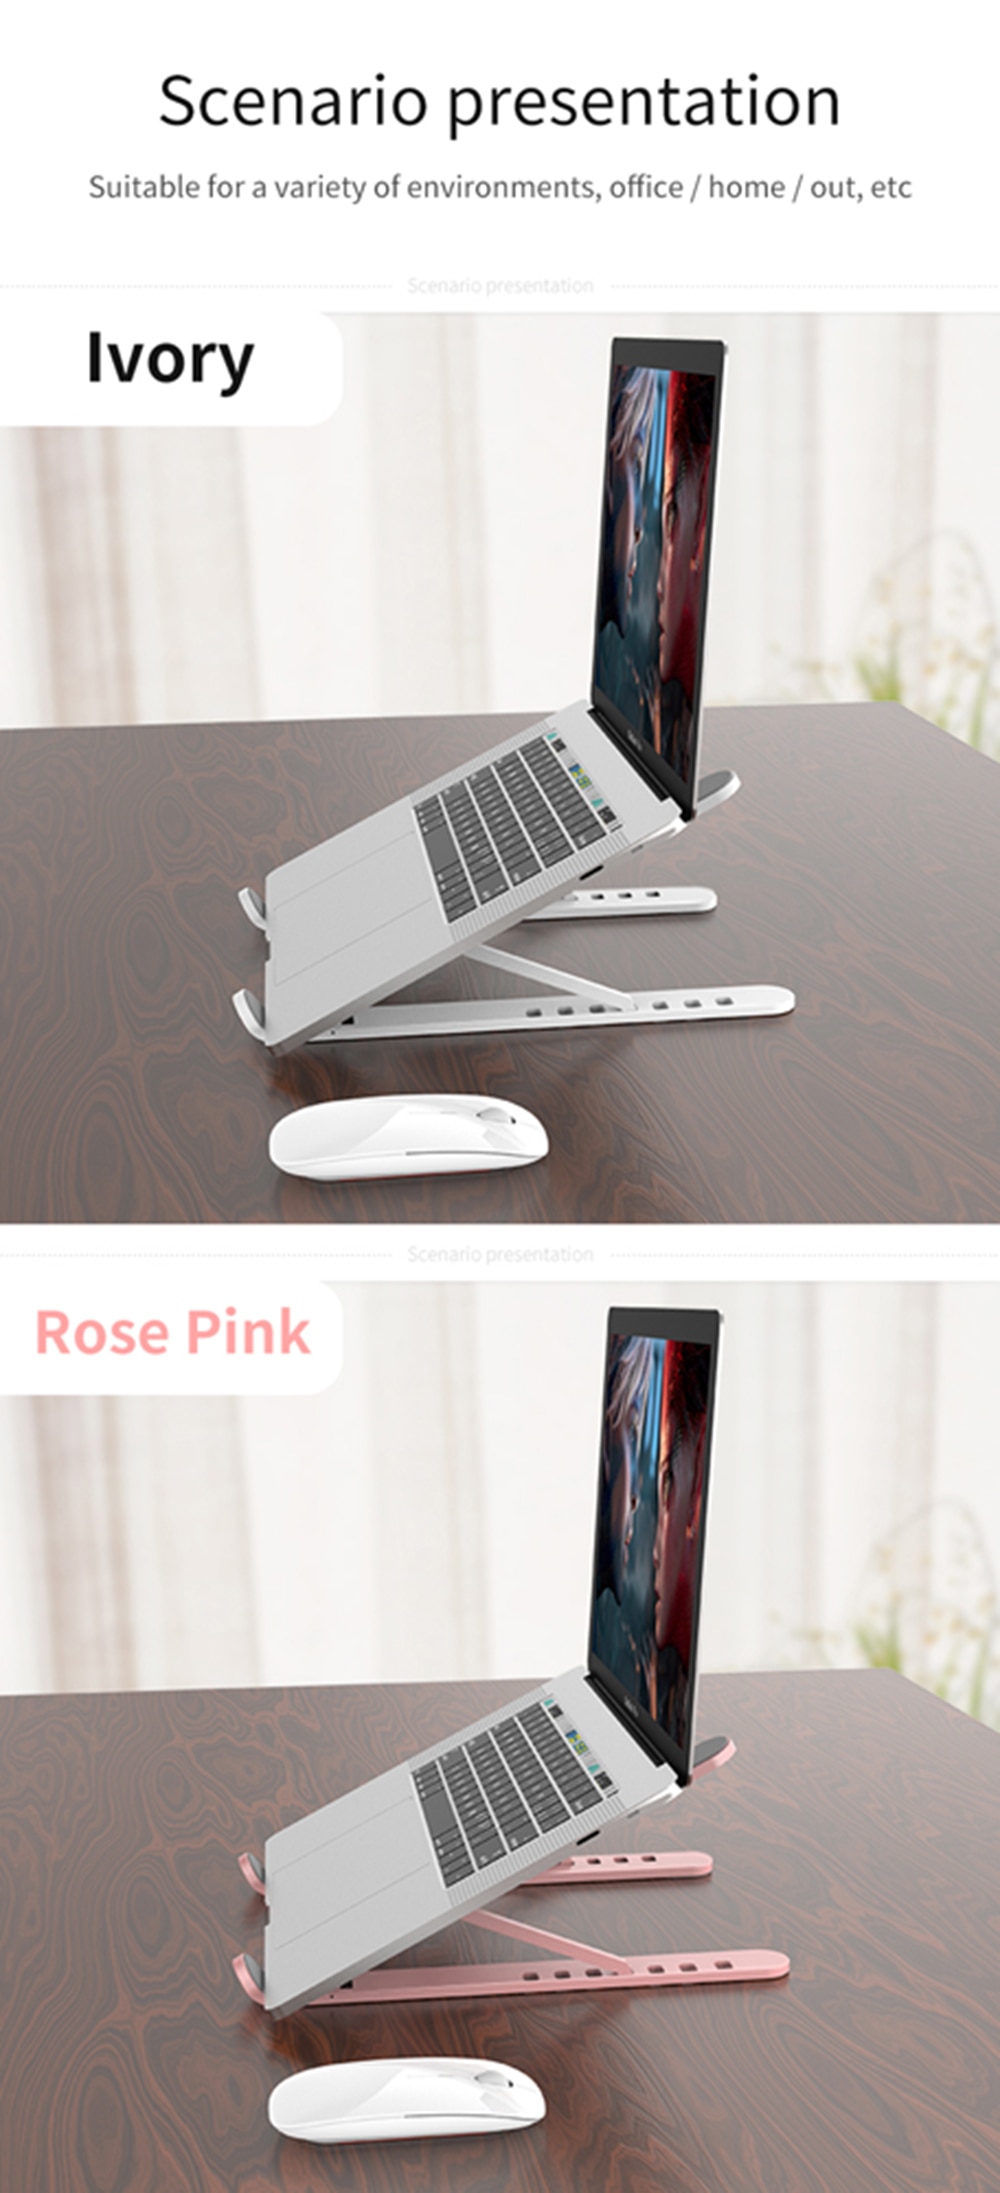 GOOJODOQ Adjustable Foldable Laptop Stand Non-slip Desktop Notebook Holder Laptop Stand For Macbook Pro Air iPad Pro DELL HP